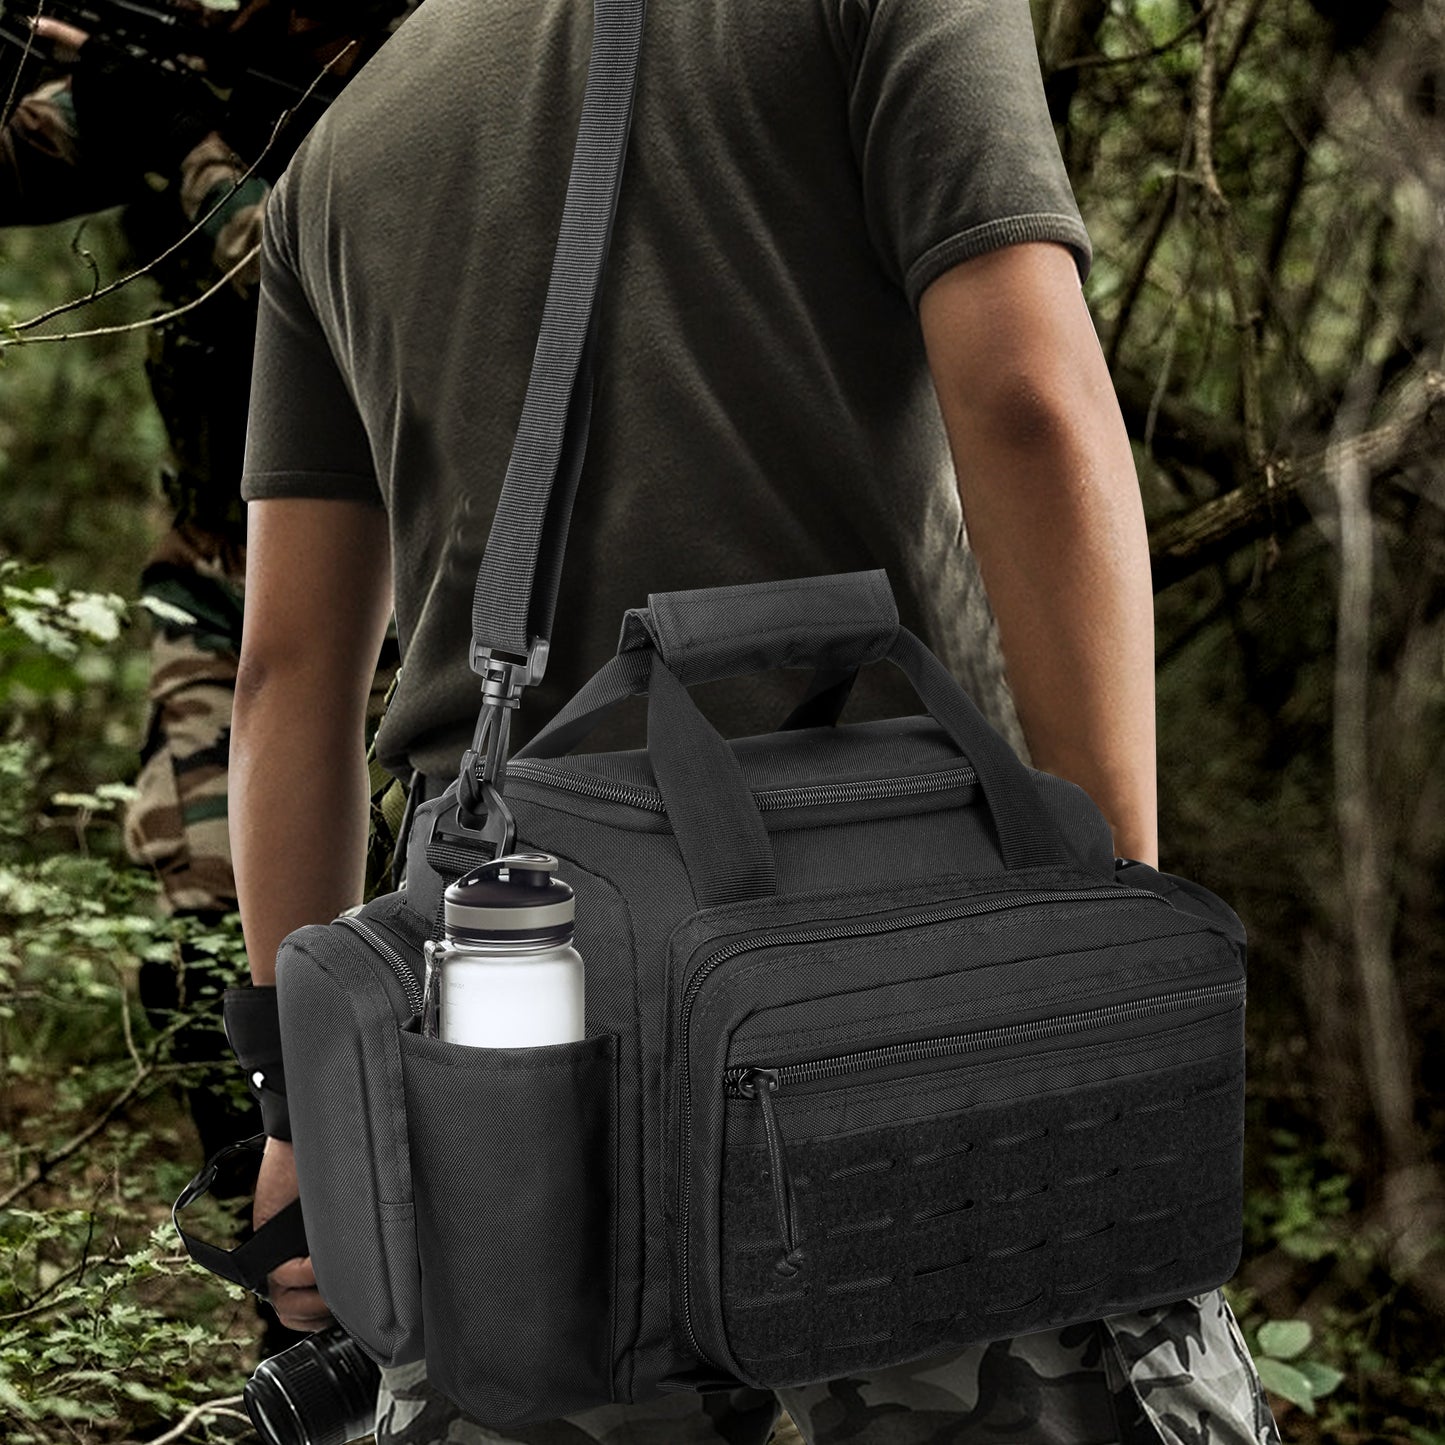 Handgun Bag with Tactical Ammo Compartment, Pistol Bag with Magazine Slots for Outdoor Shooting GBPB002